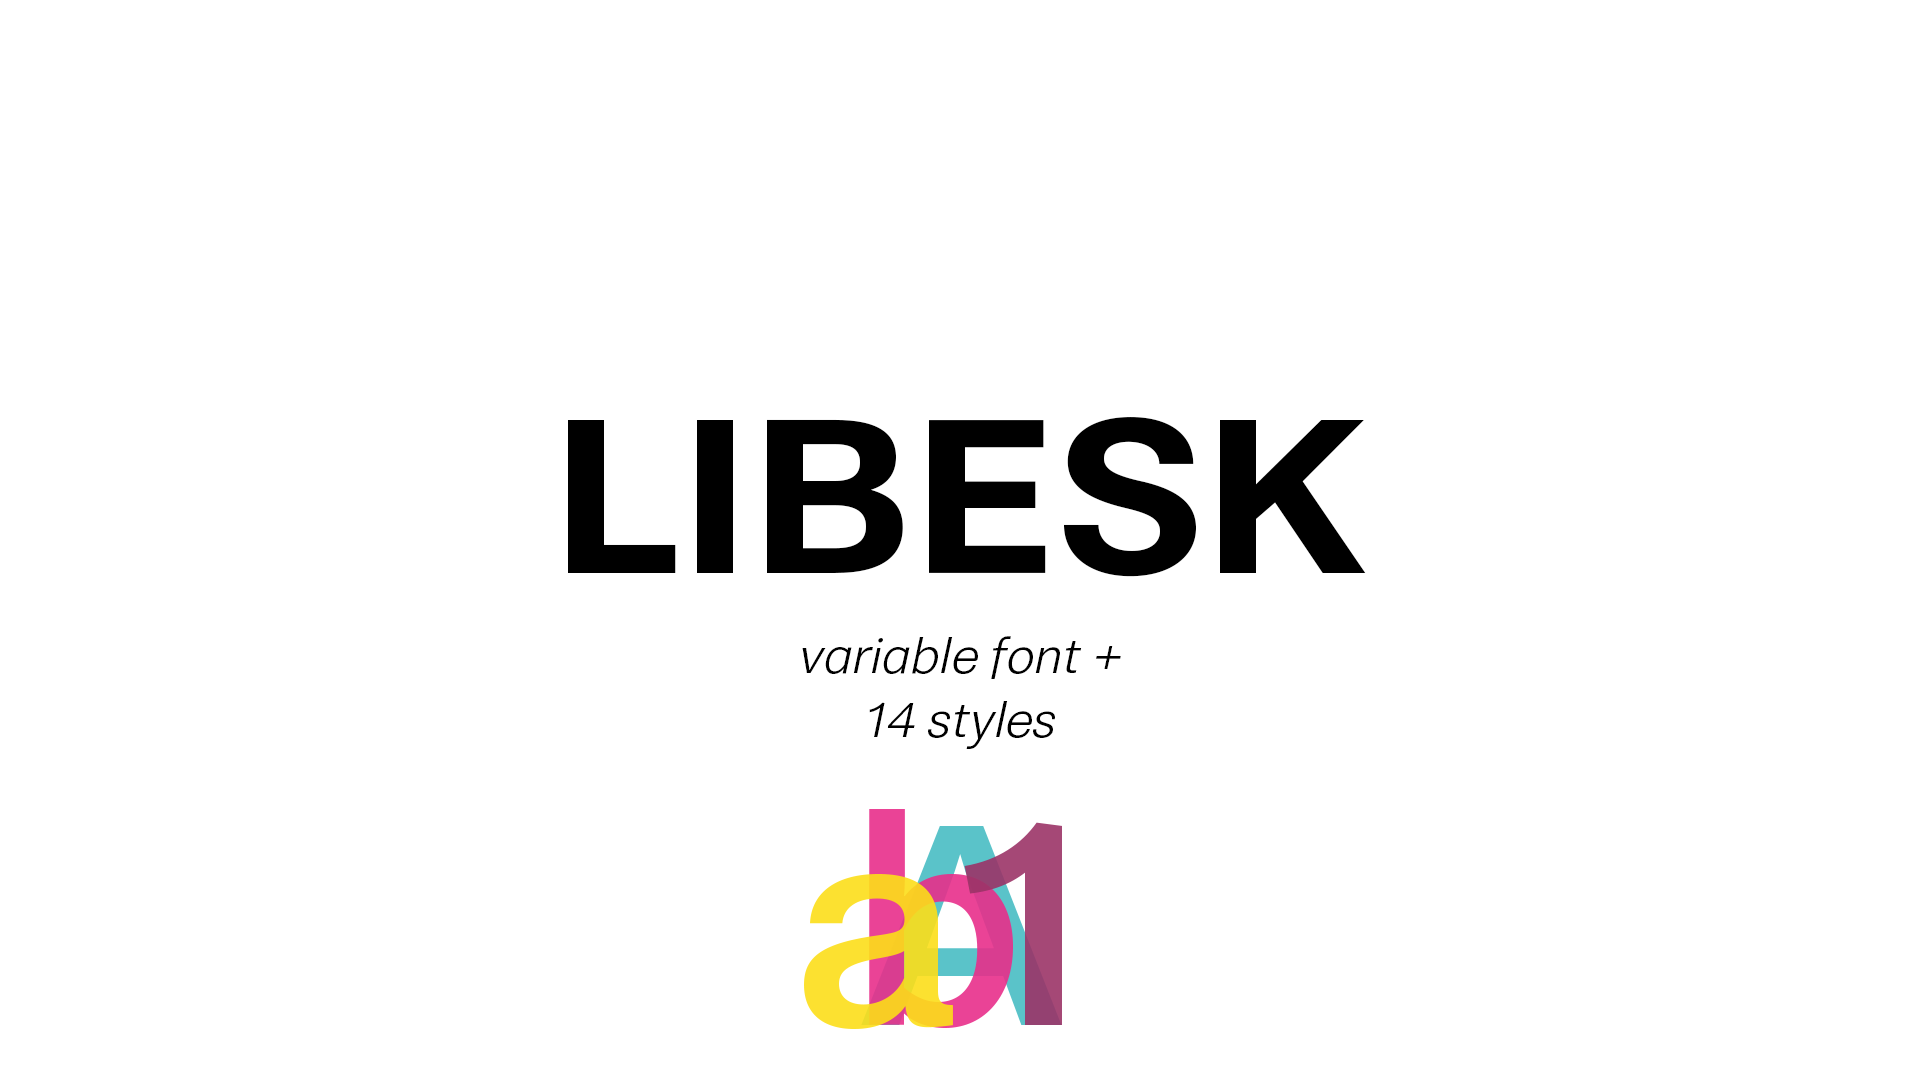 Font family Libesk